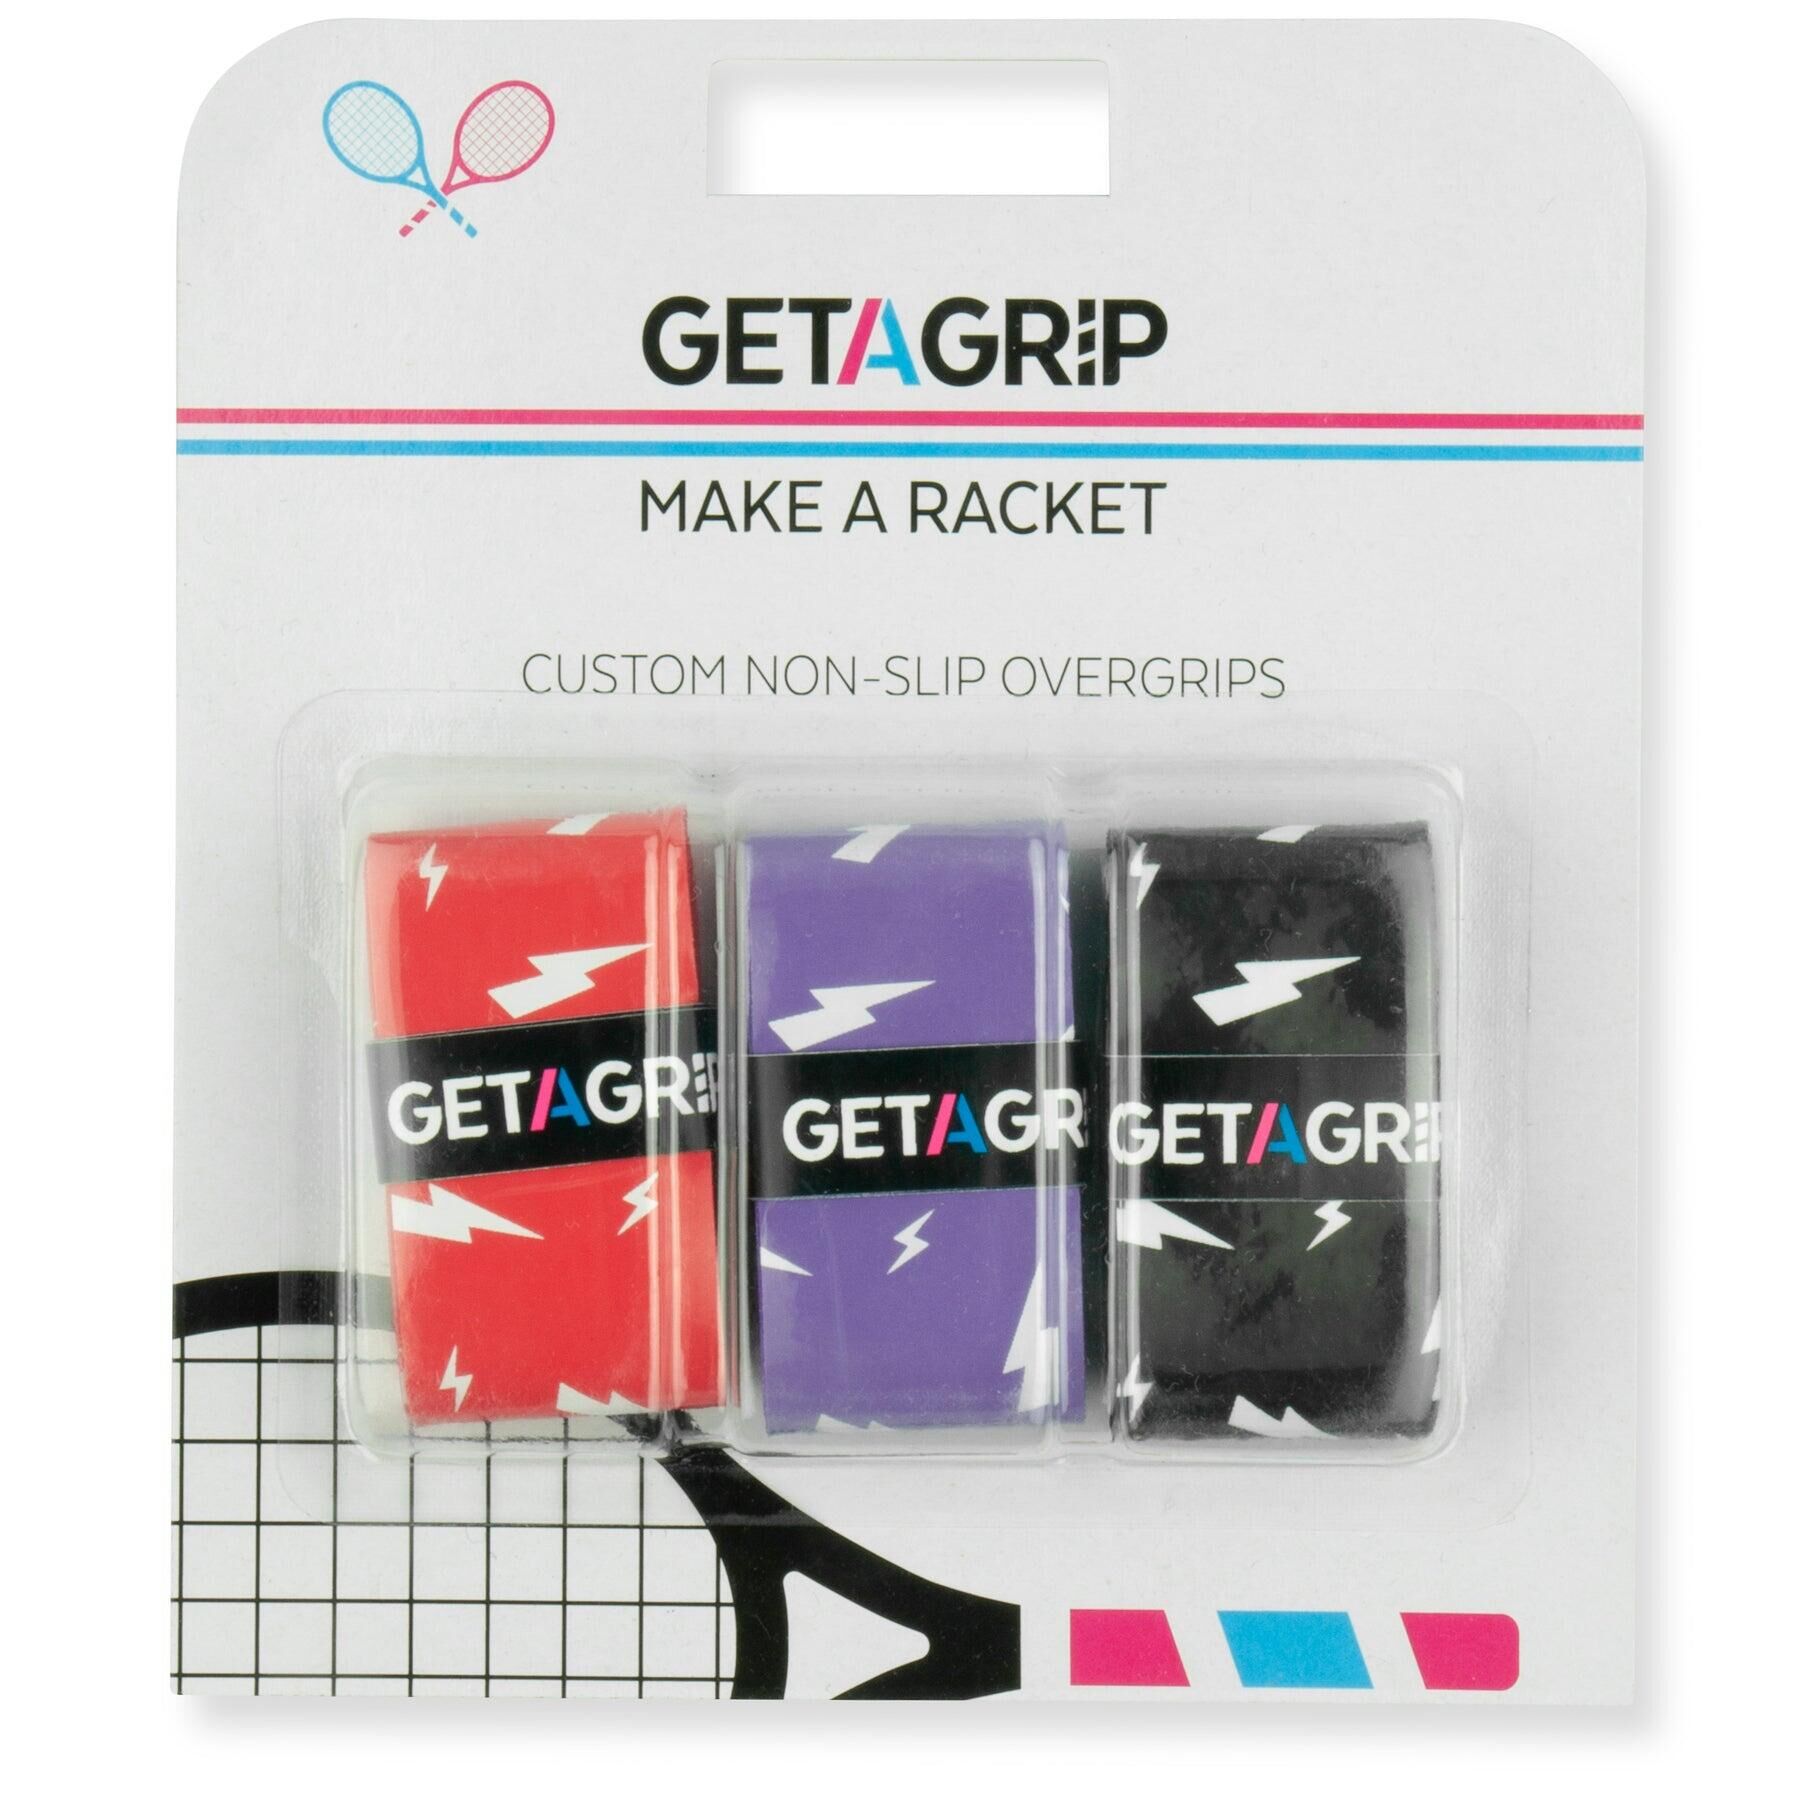 GET A GRIP Get A Grip Tennis Grips - Charged Up Pack